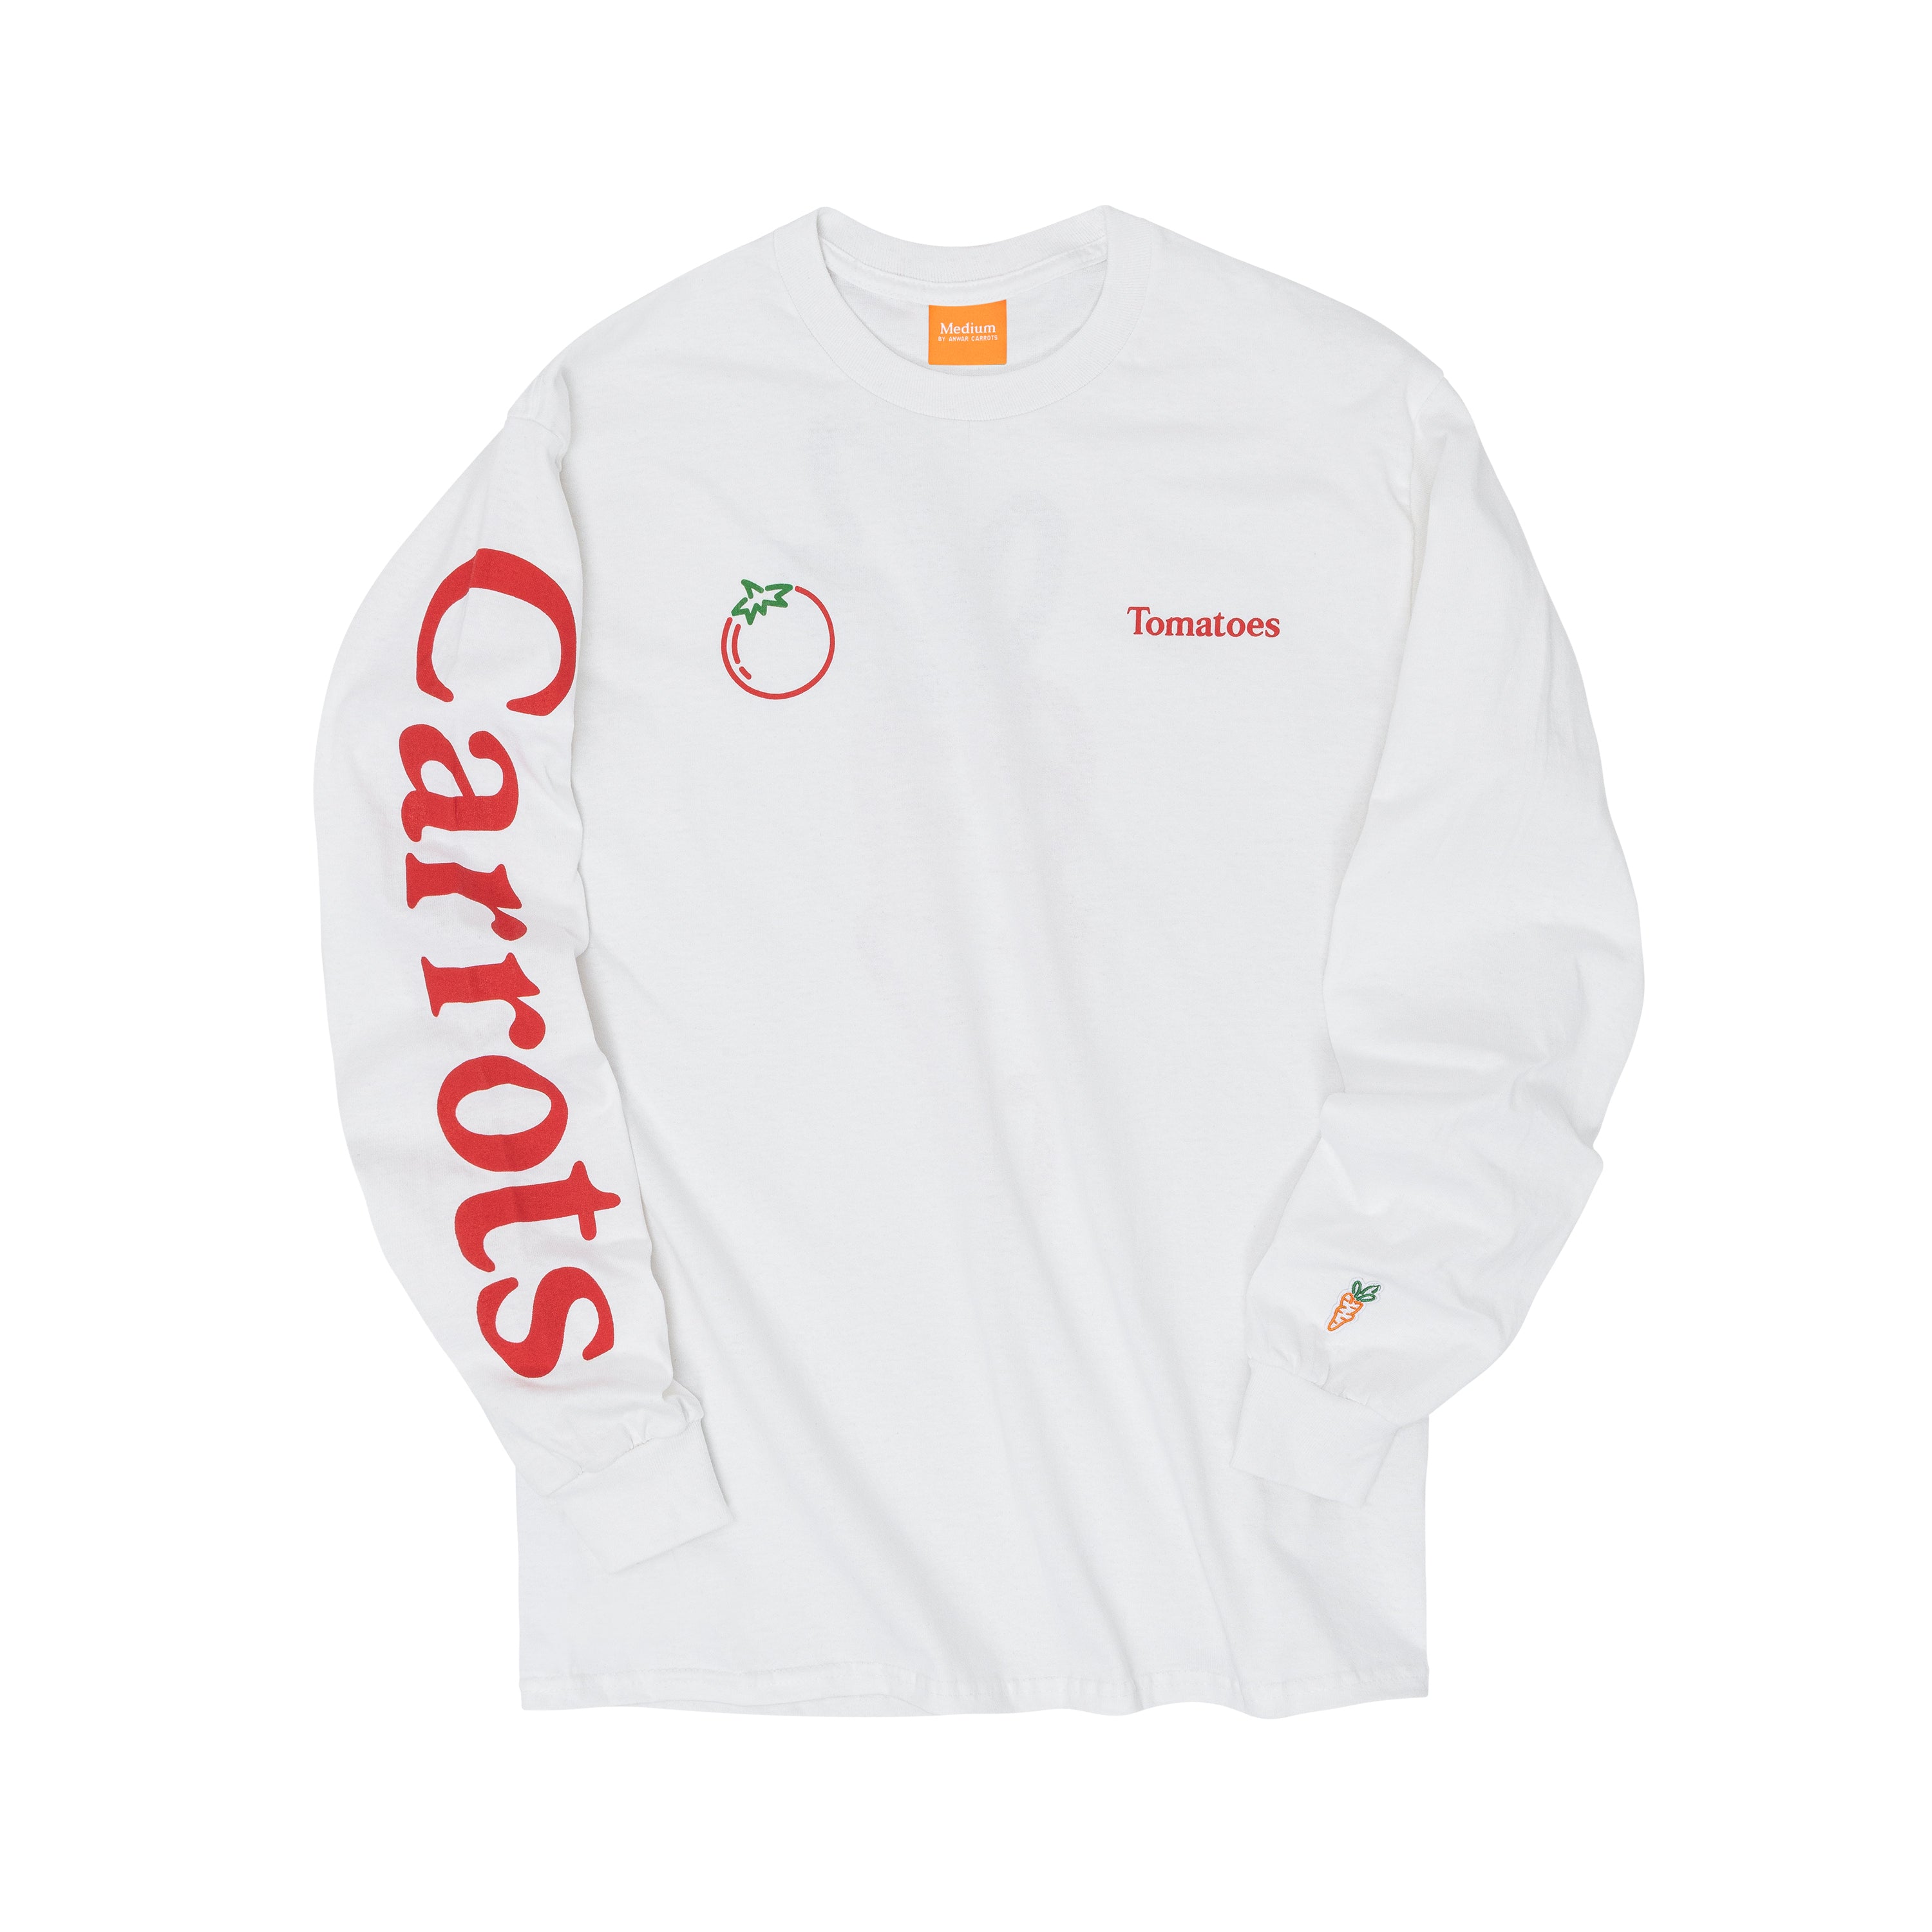 Carrots 23\' - Carrots by Carrots Anwar | TOMATOES – | SHIRT Carrots QS Anwar WHITE LONGSLEEVE By HOLIDAY